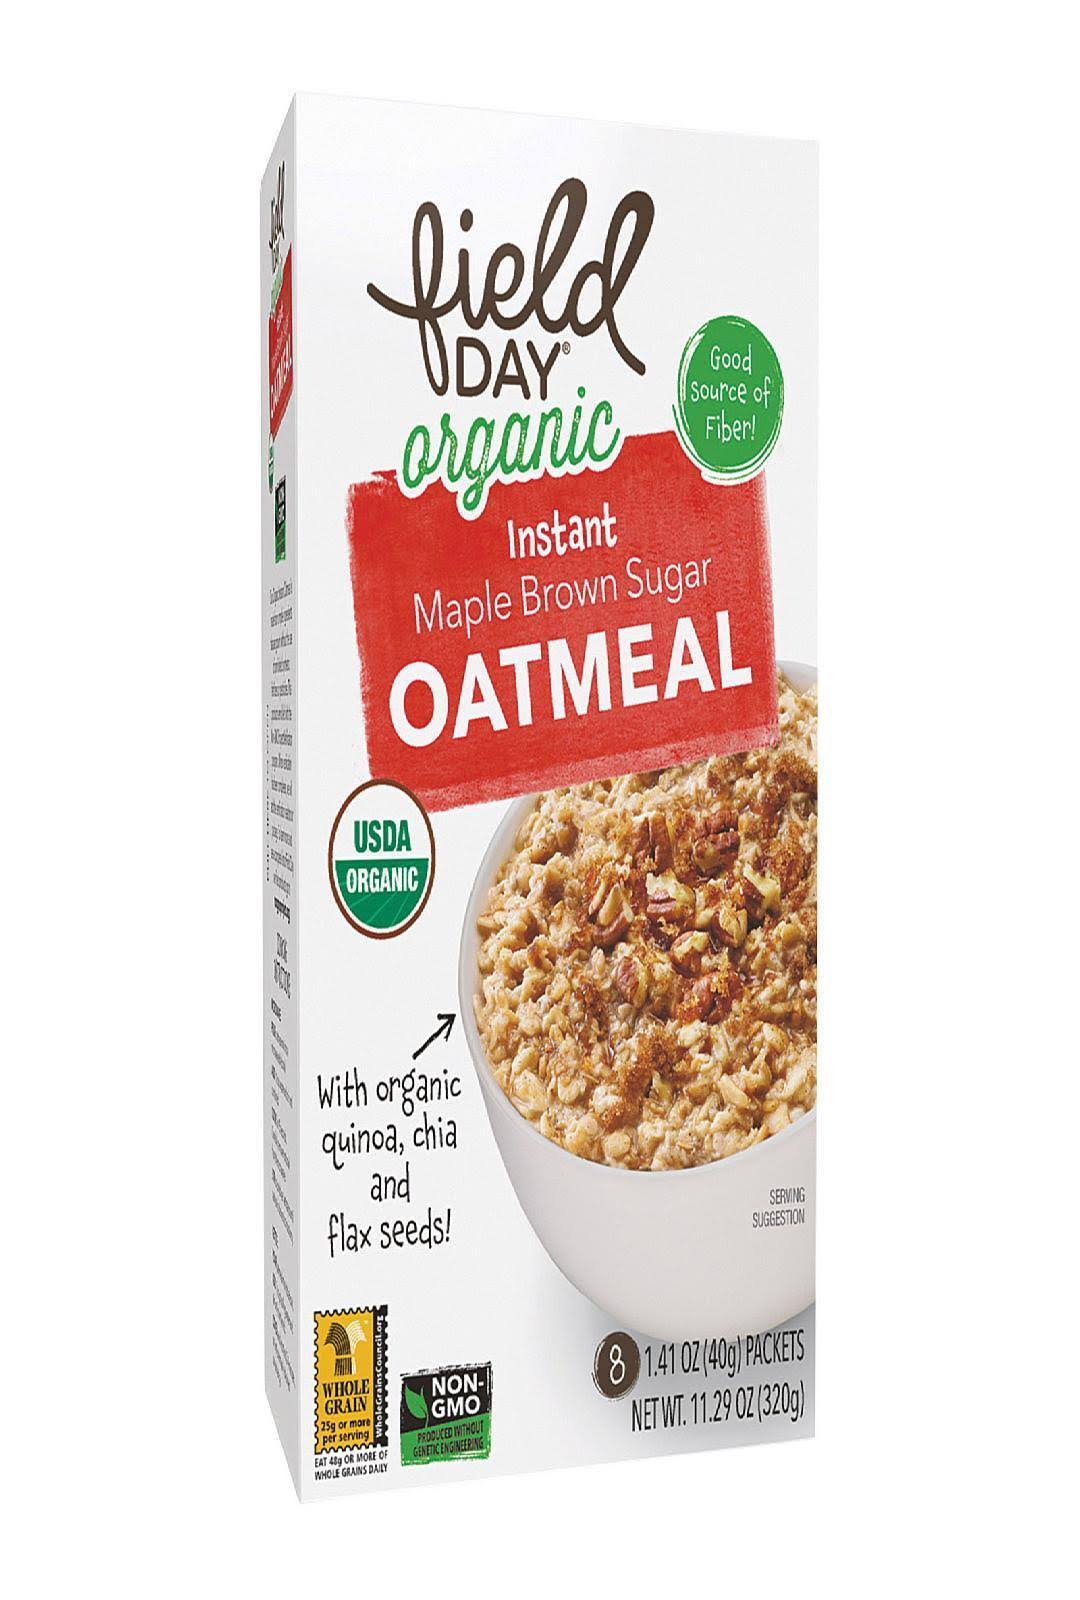 Field Day Organic Instant Maple Brown Sugar Oatmeal - Oatmeal - Case of 6 - 11.2 - Default Title